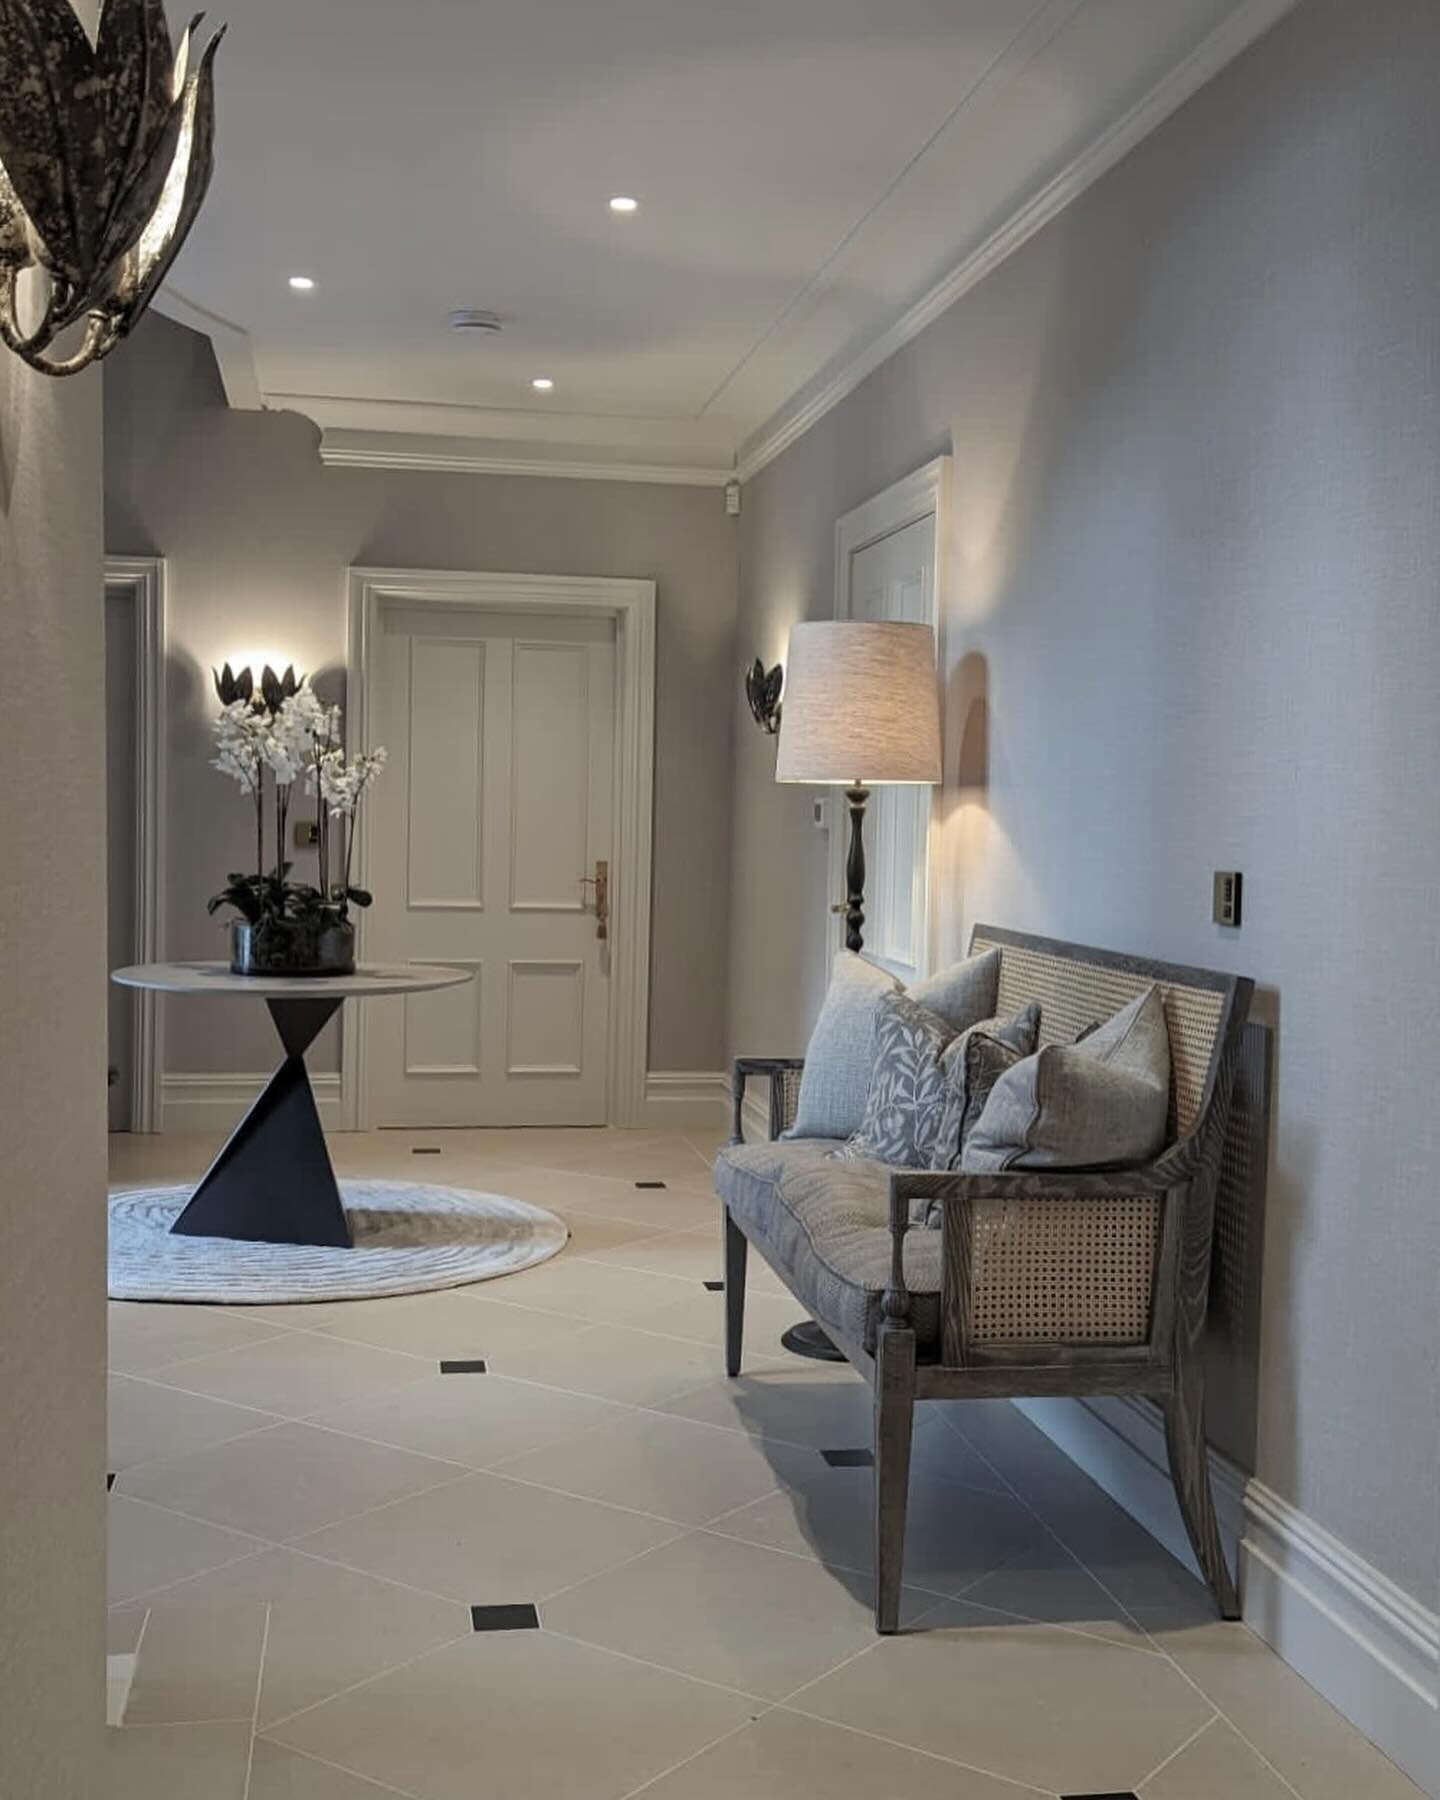 Interior design is all about creating a place to call home; a space to connect to and feel safe in 🖤

Transforming this hallway at a recent project, into a welcoming haven of calm and tranquility, a neutral passageway to other rooms with a grounding